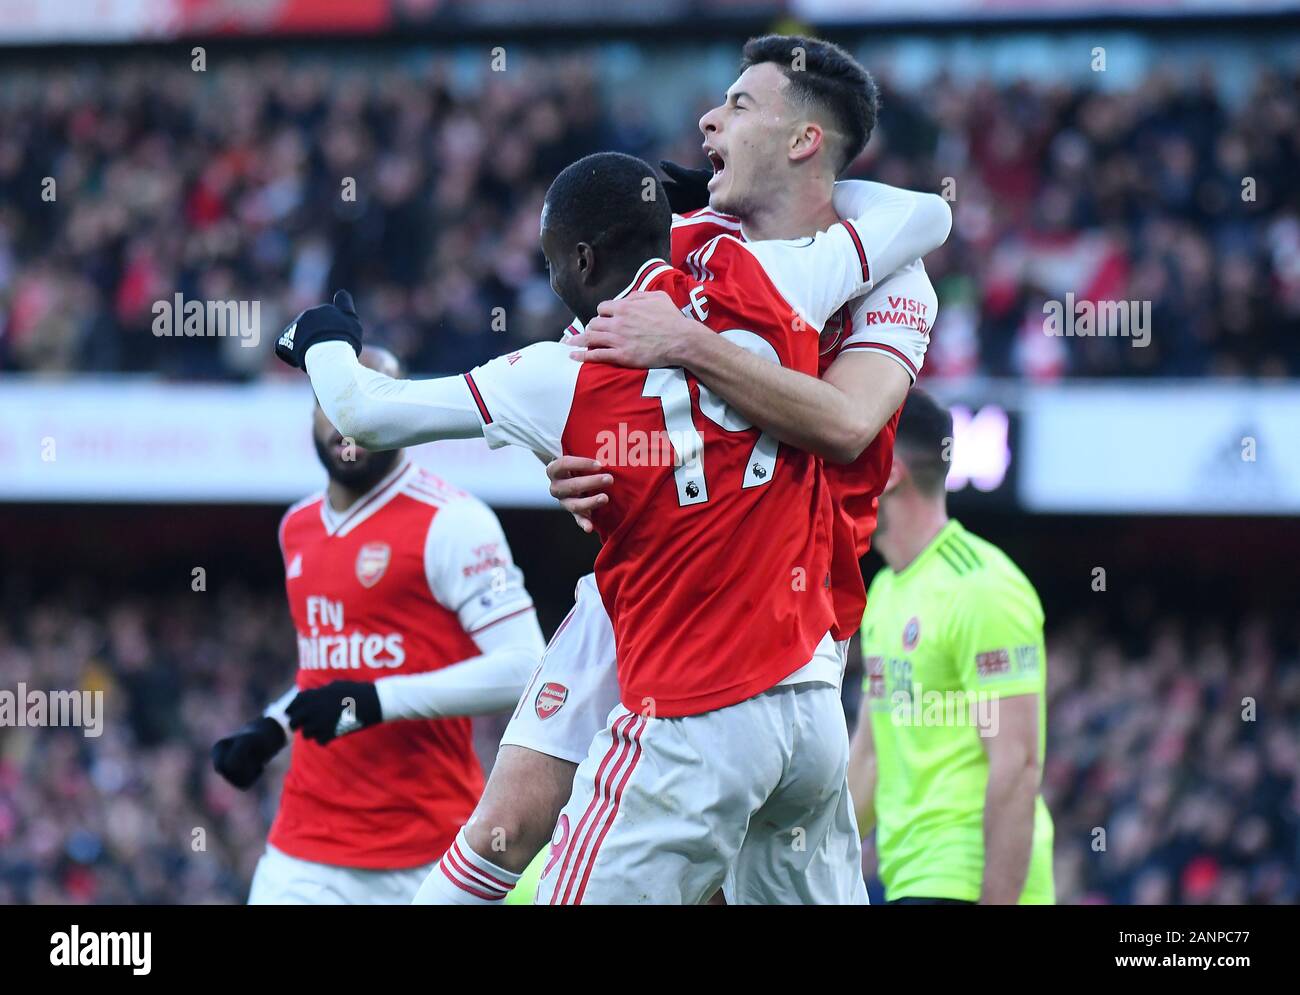 LONDON, ENGLAND - JANUARY 18, 2020: Gabriel Martinelli of Arsenal celebrates Nicolas Pepe of Arsenal after he scored a goal during the 2019/20 Premier League game between Arsenal FC and Sheffield United FC at Emirates Stadium. Stock Photo